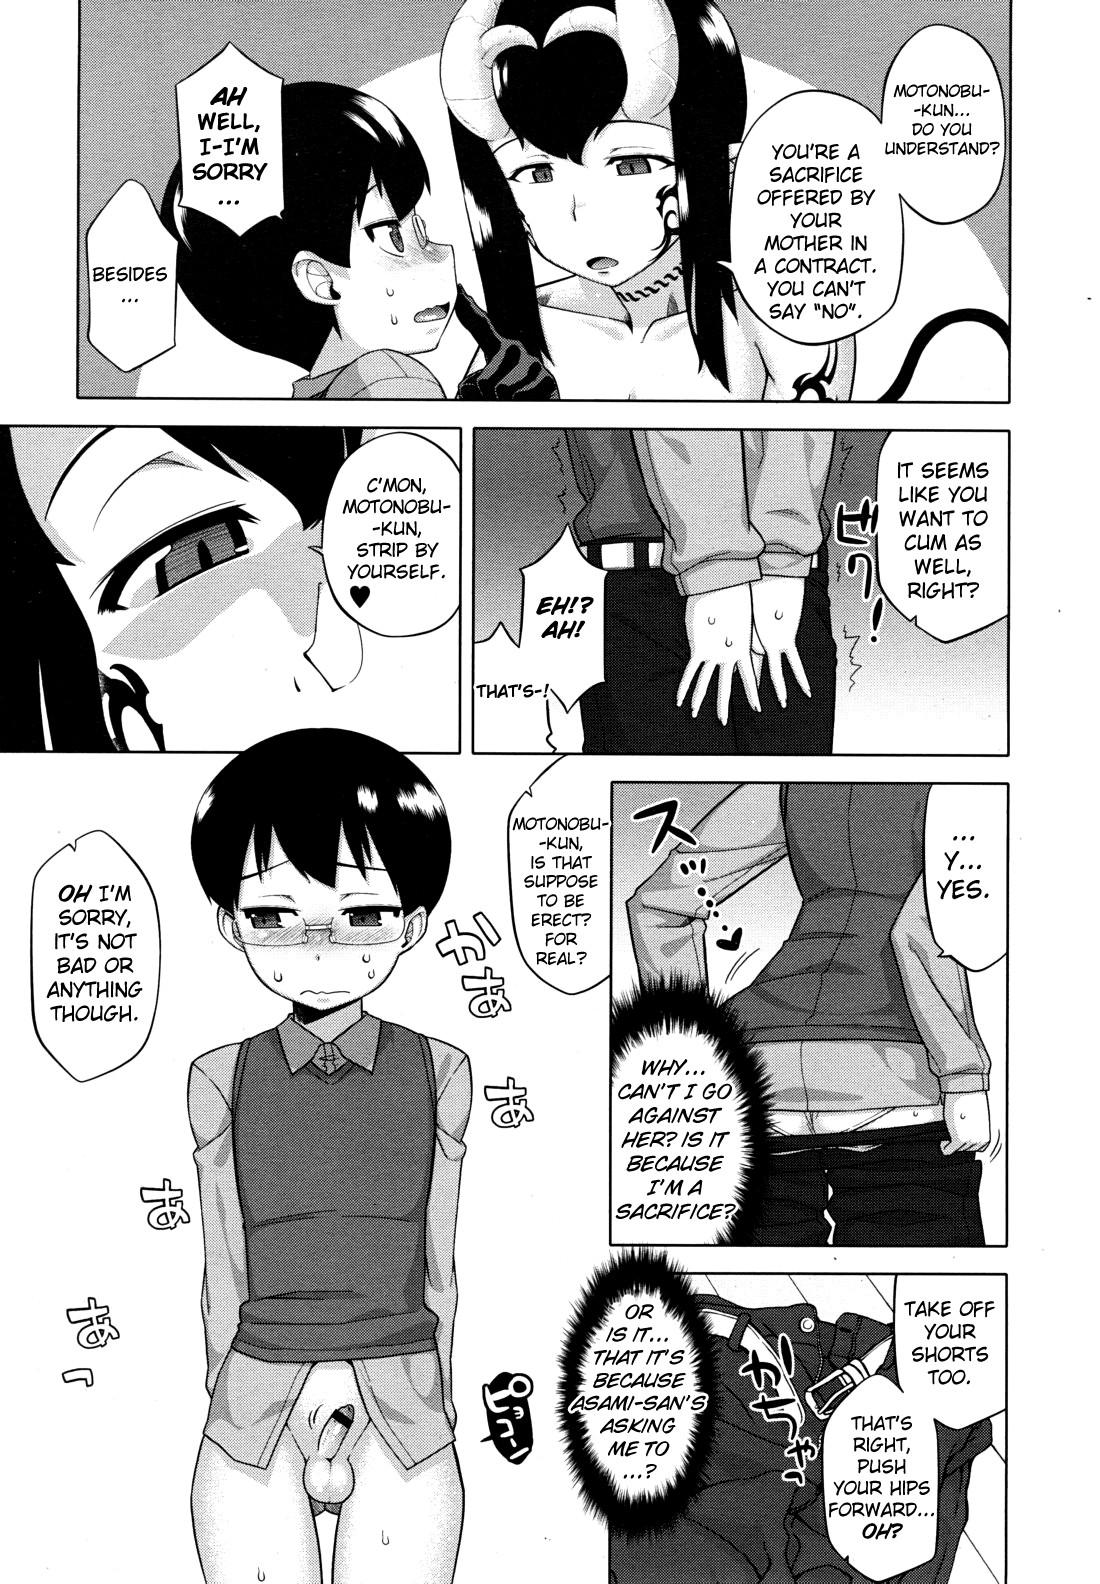 Hymen The Succubus Lady From Next Door Ch. 1-3 Pregnant - Page 9